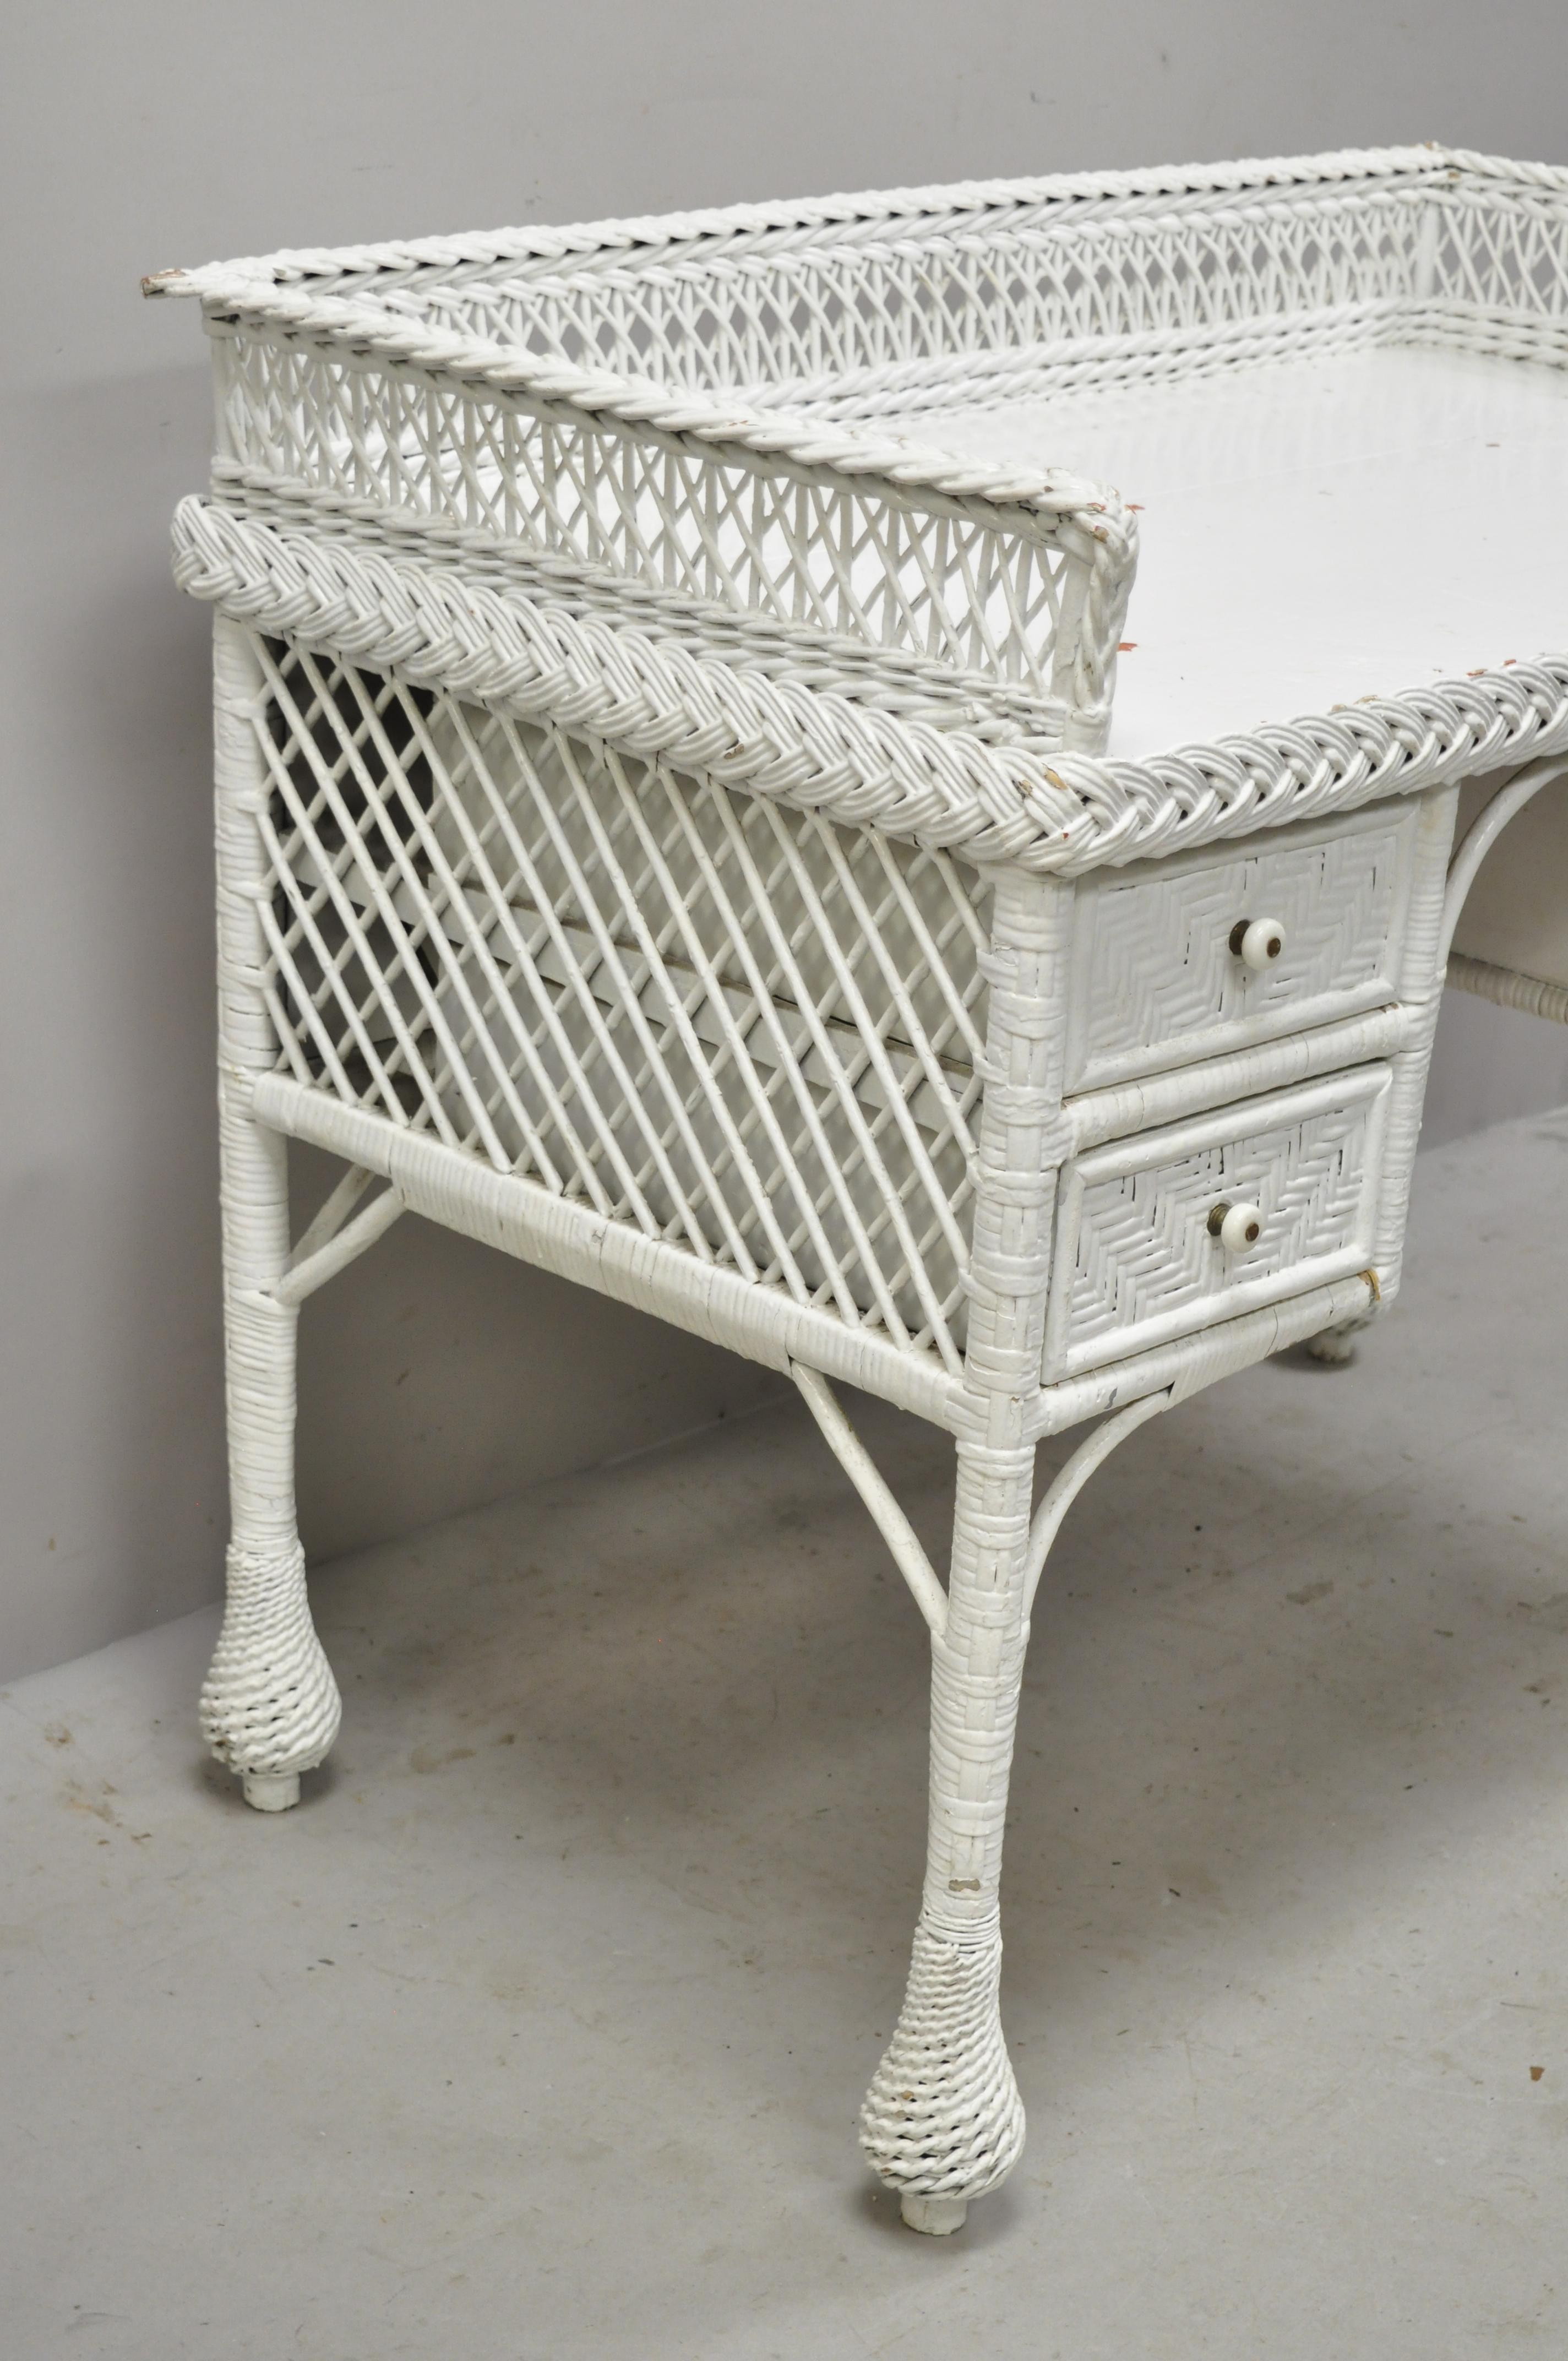 20th Century Antique Victorian Style White Wicker Vanity Desk with Drawers and Chair Set